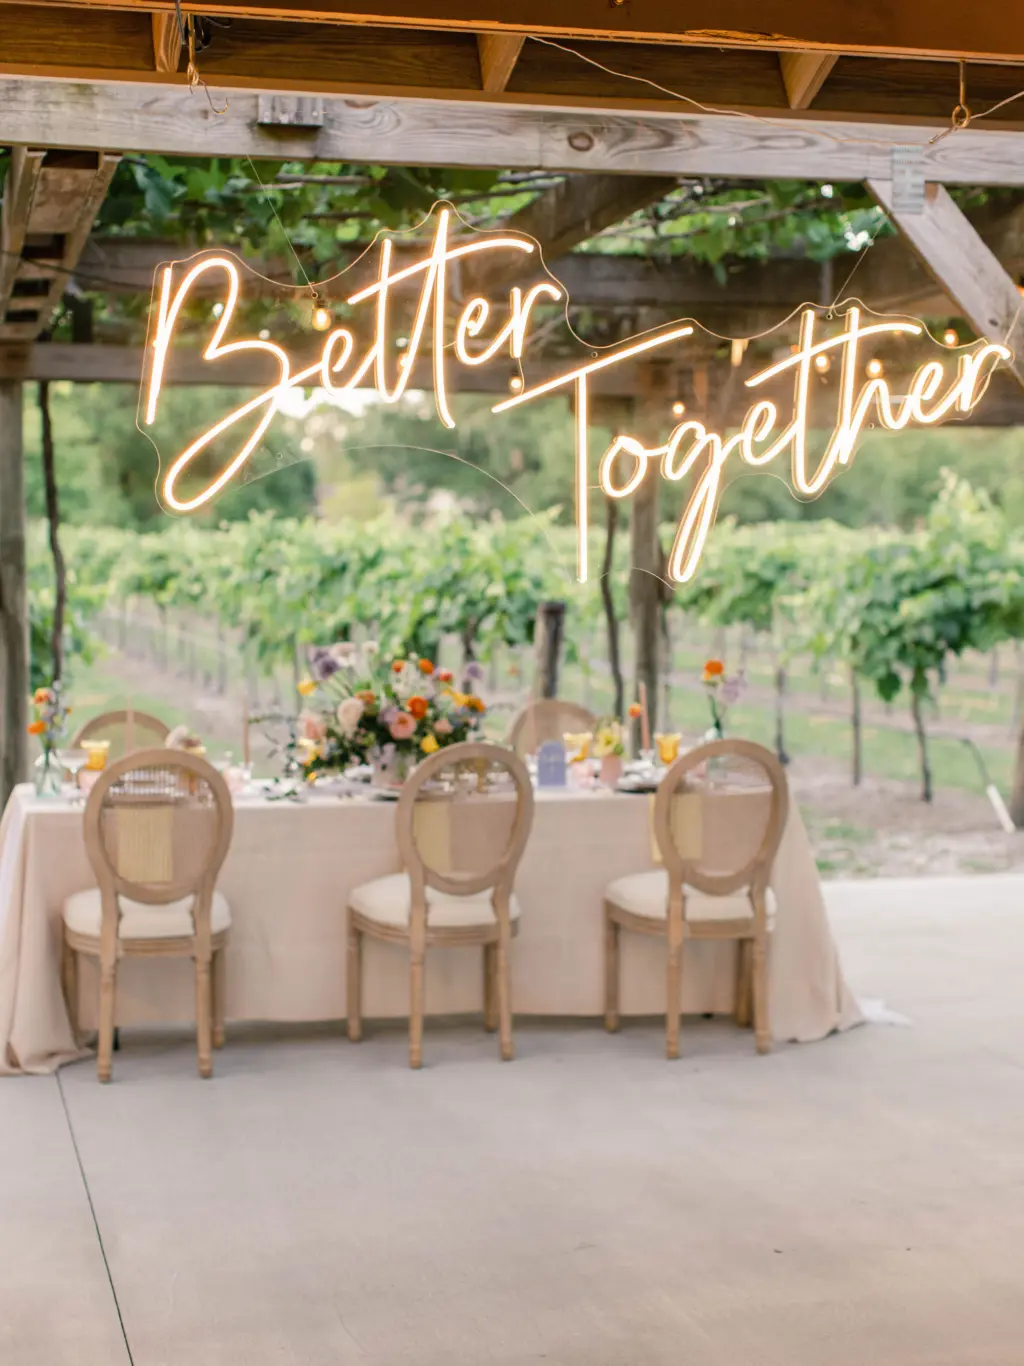 Better Together Neon Sign Backdrop Decor Inspiration for Spring Vineyard Wedding Reception | White Oak Cane Rattan Spring Wedding Reception Chair Inspiration with Long Feasting Table and Pastel Linen | Venue Fiorelli Winery | Colorful Whimsical Wedding Centerpiece Inspiration | Tampa Bay St. Petersburg Florist Save The Date Florida